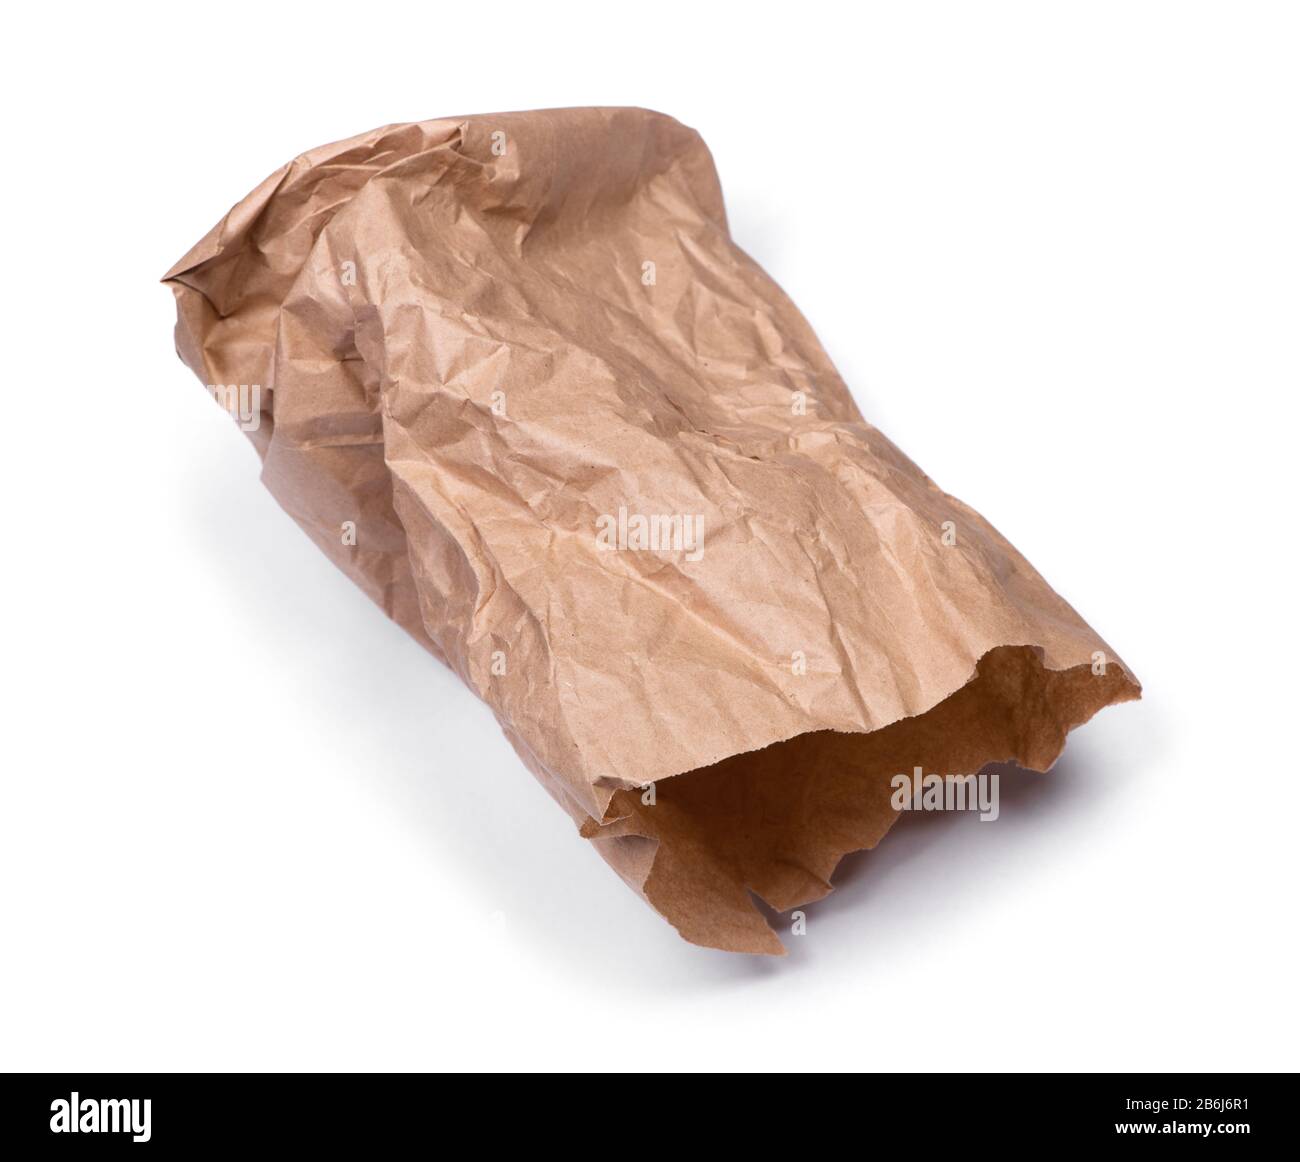 Crumpled paper bag isolated on white background Stock Photo - Alamy